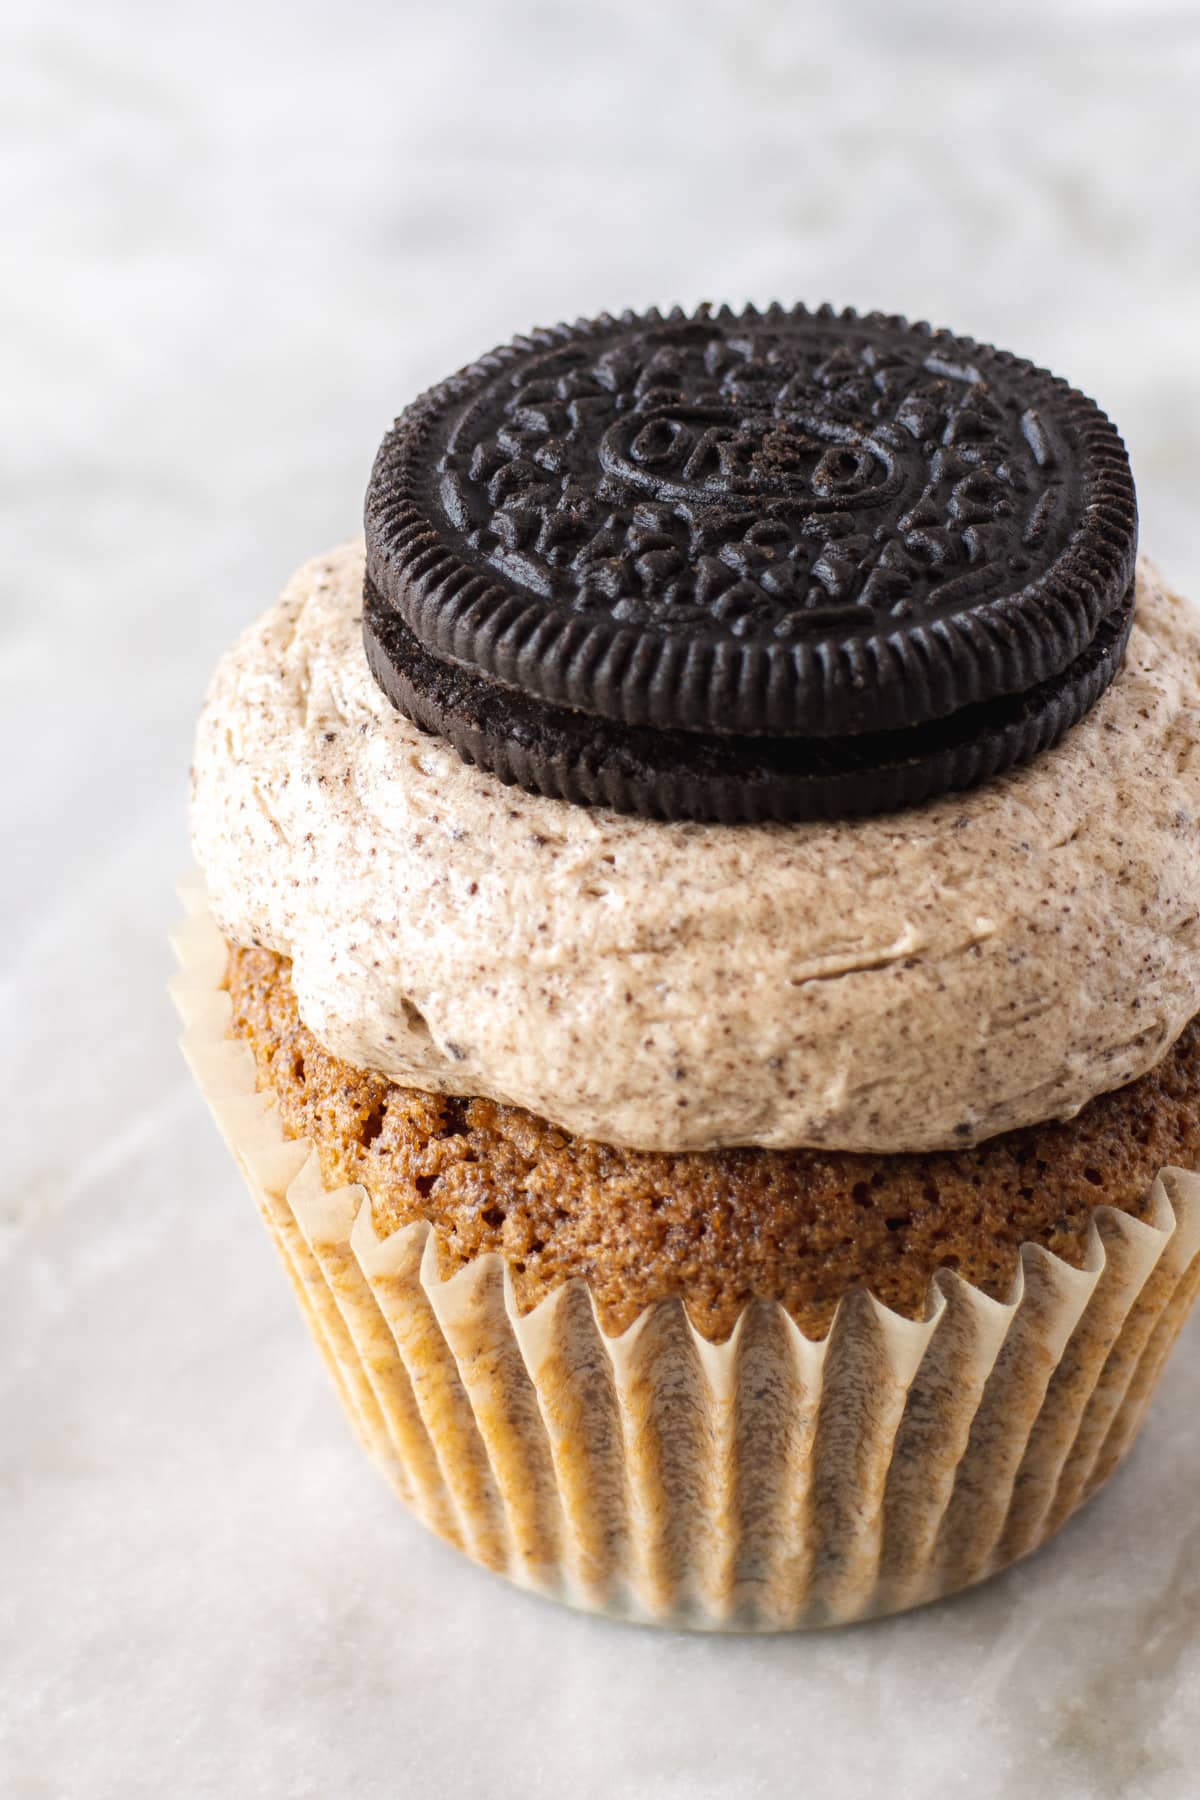 Frosted cupcake with an Oreo cookie on top